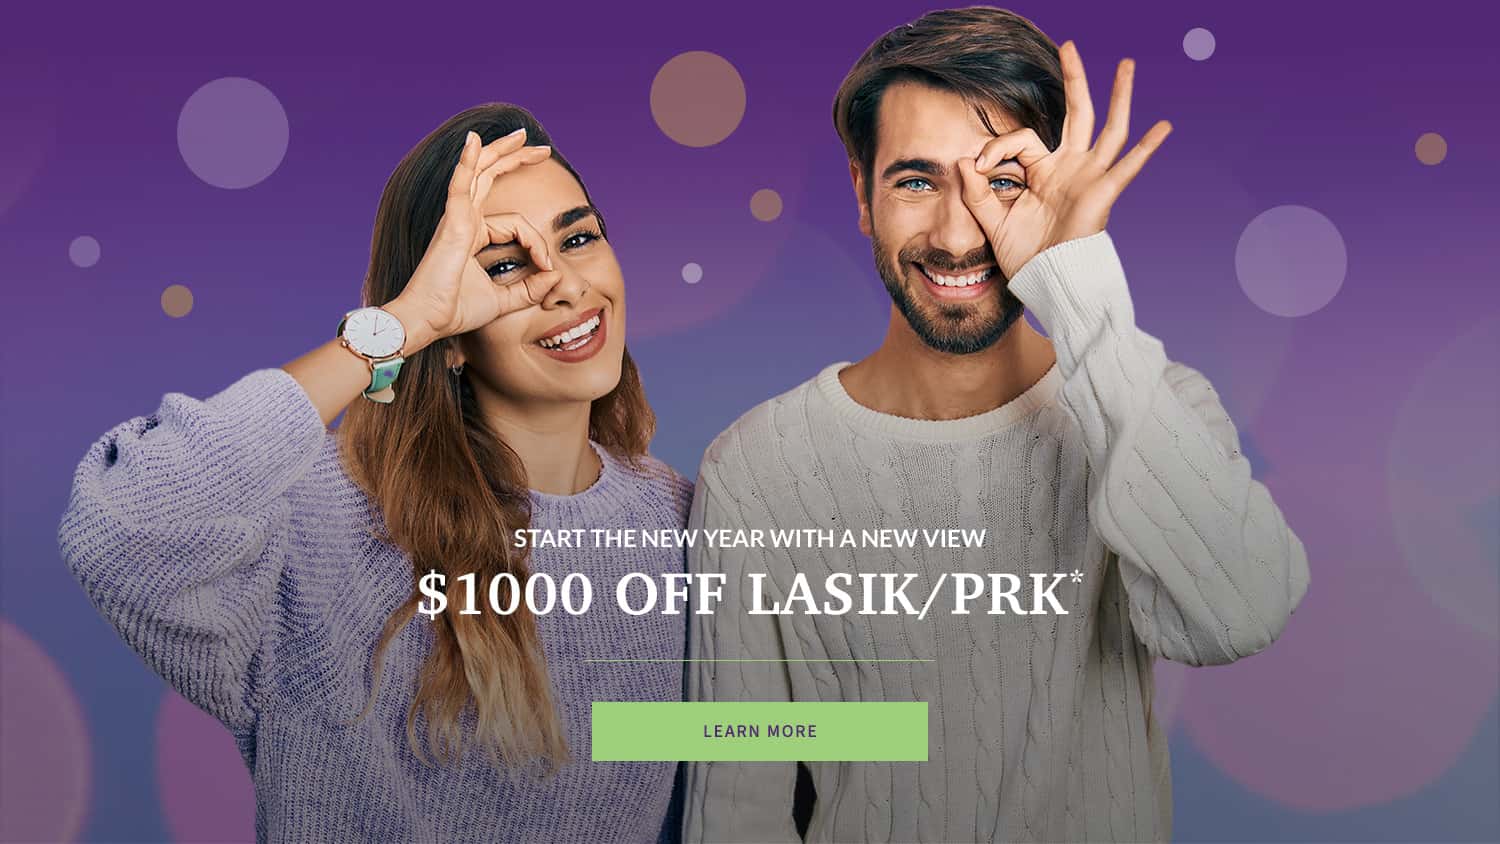 GET BACK TO THE WAY YOU WERE MEANT TO SEE WITH
$1000 OFF ALL-LASER LASIK/PRK*